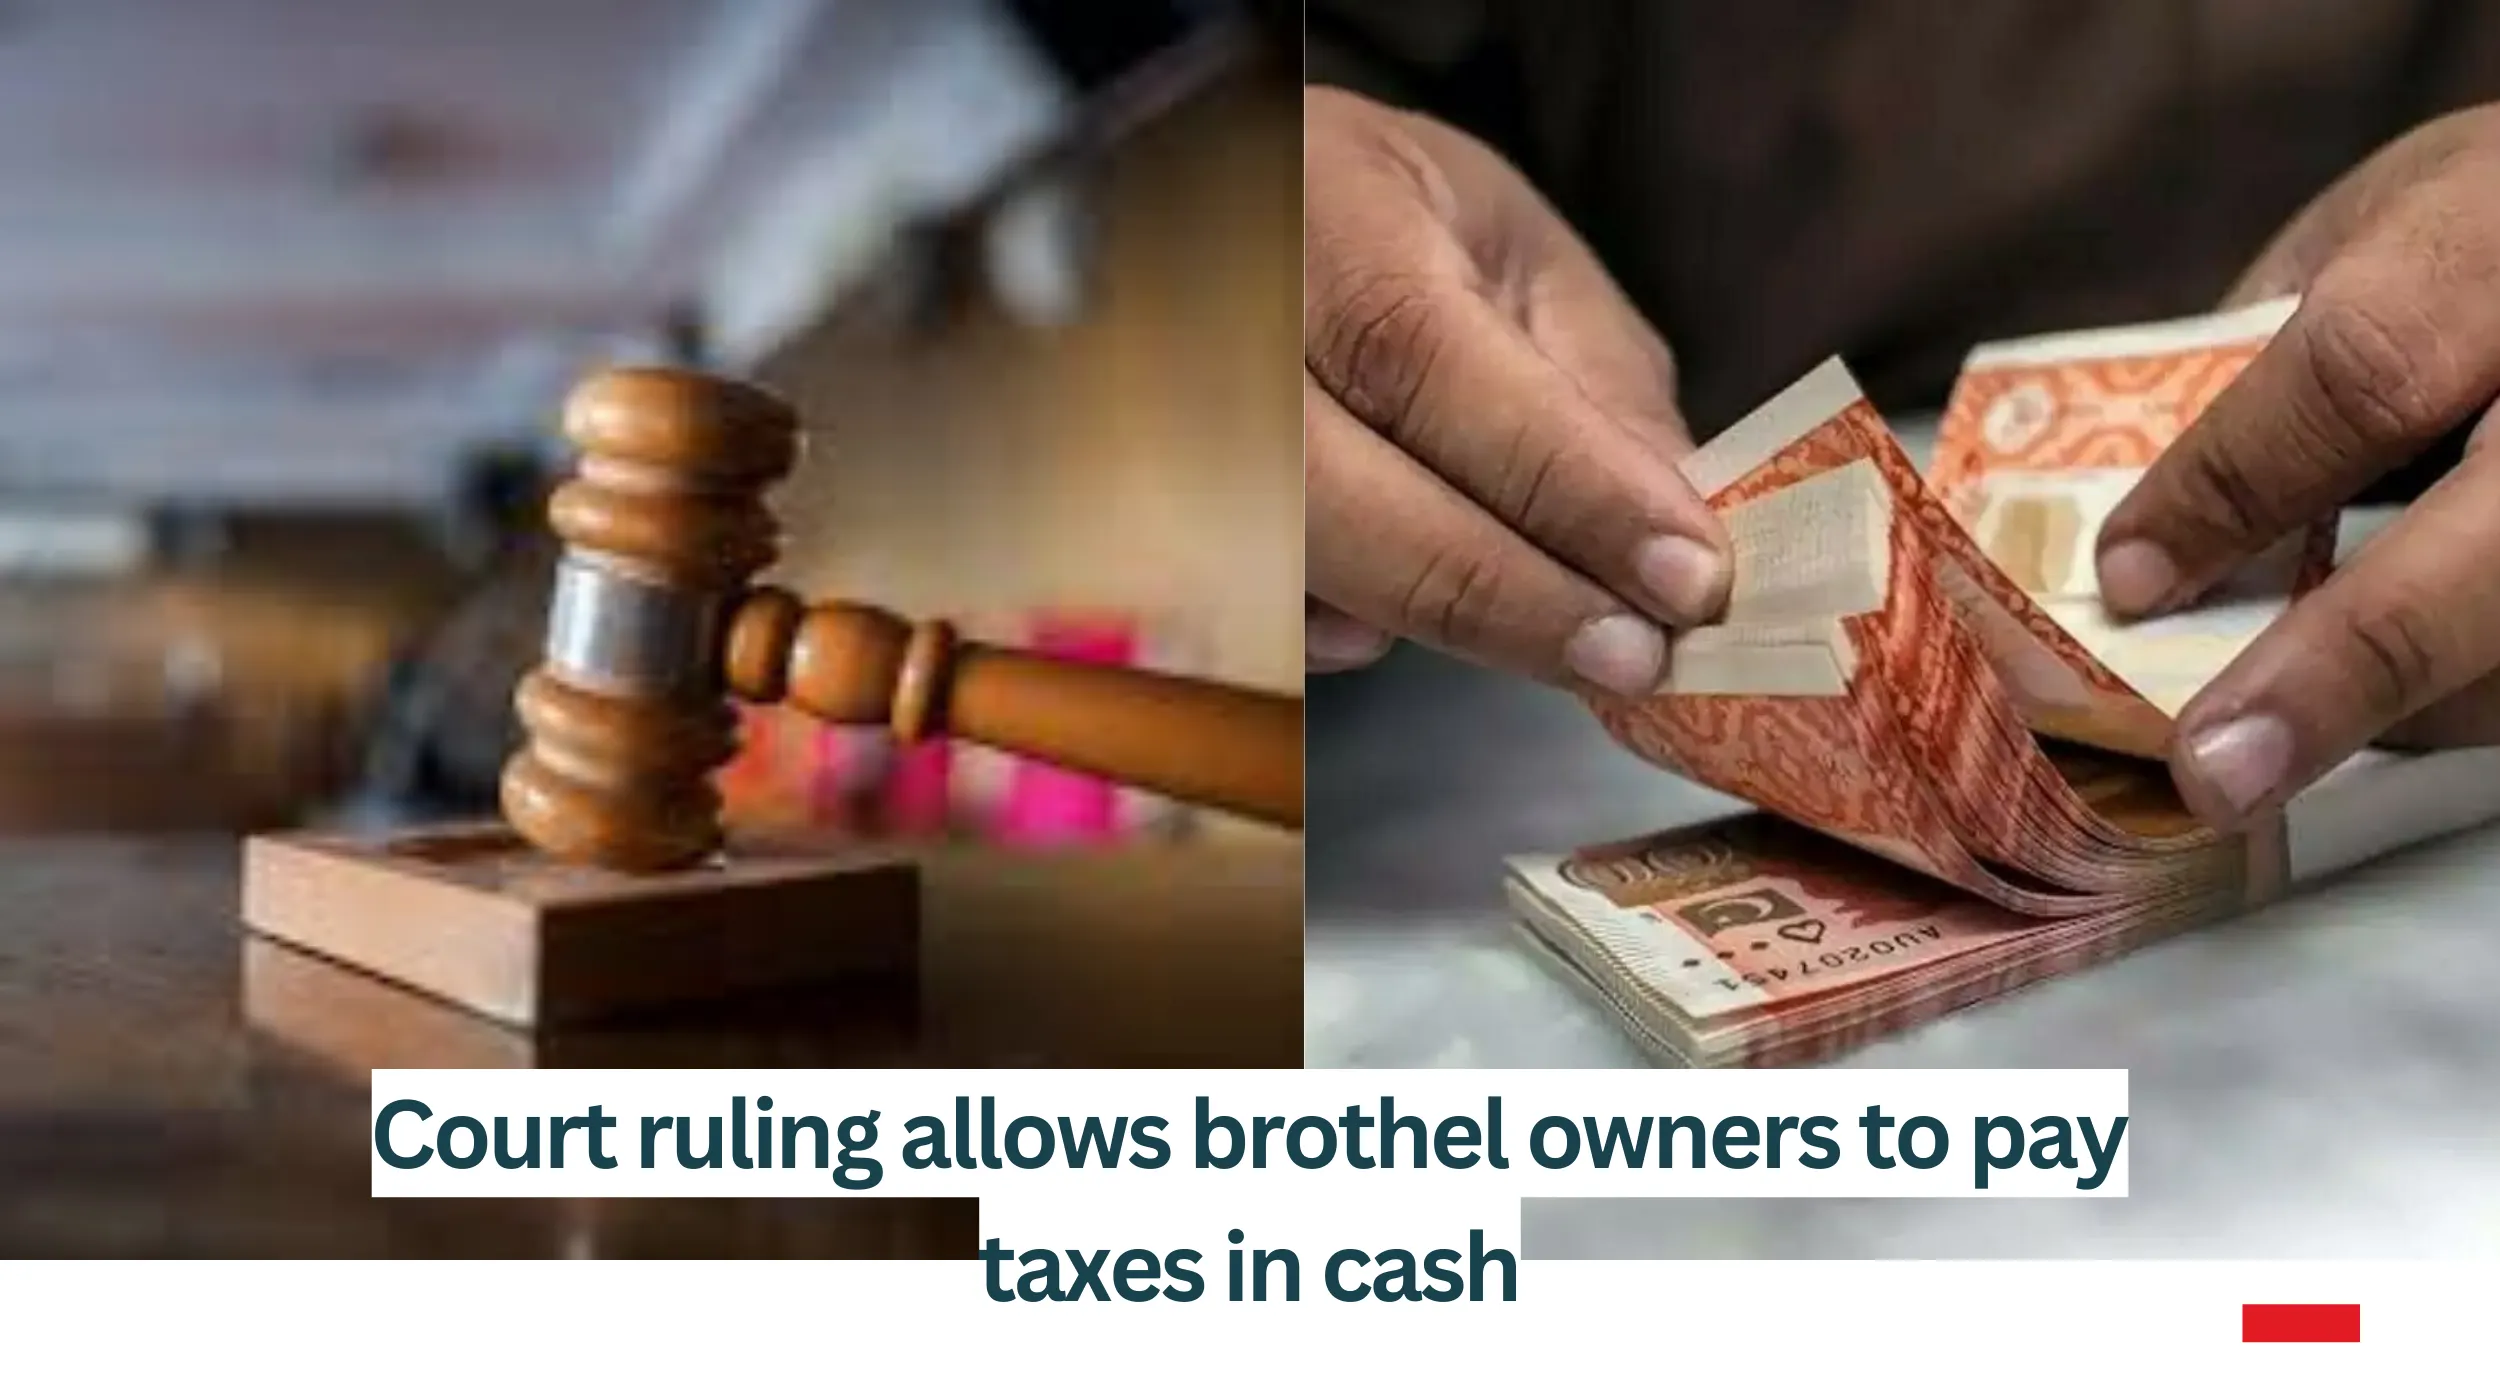 Court-ruling-allows-brothel-owners-to-pay-taxes-in-cas